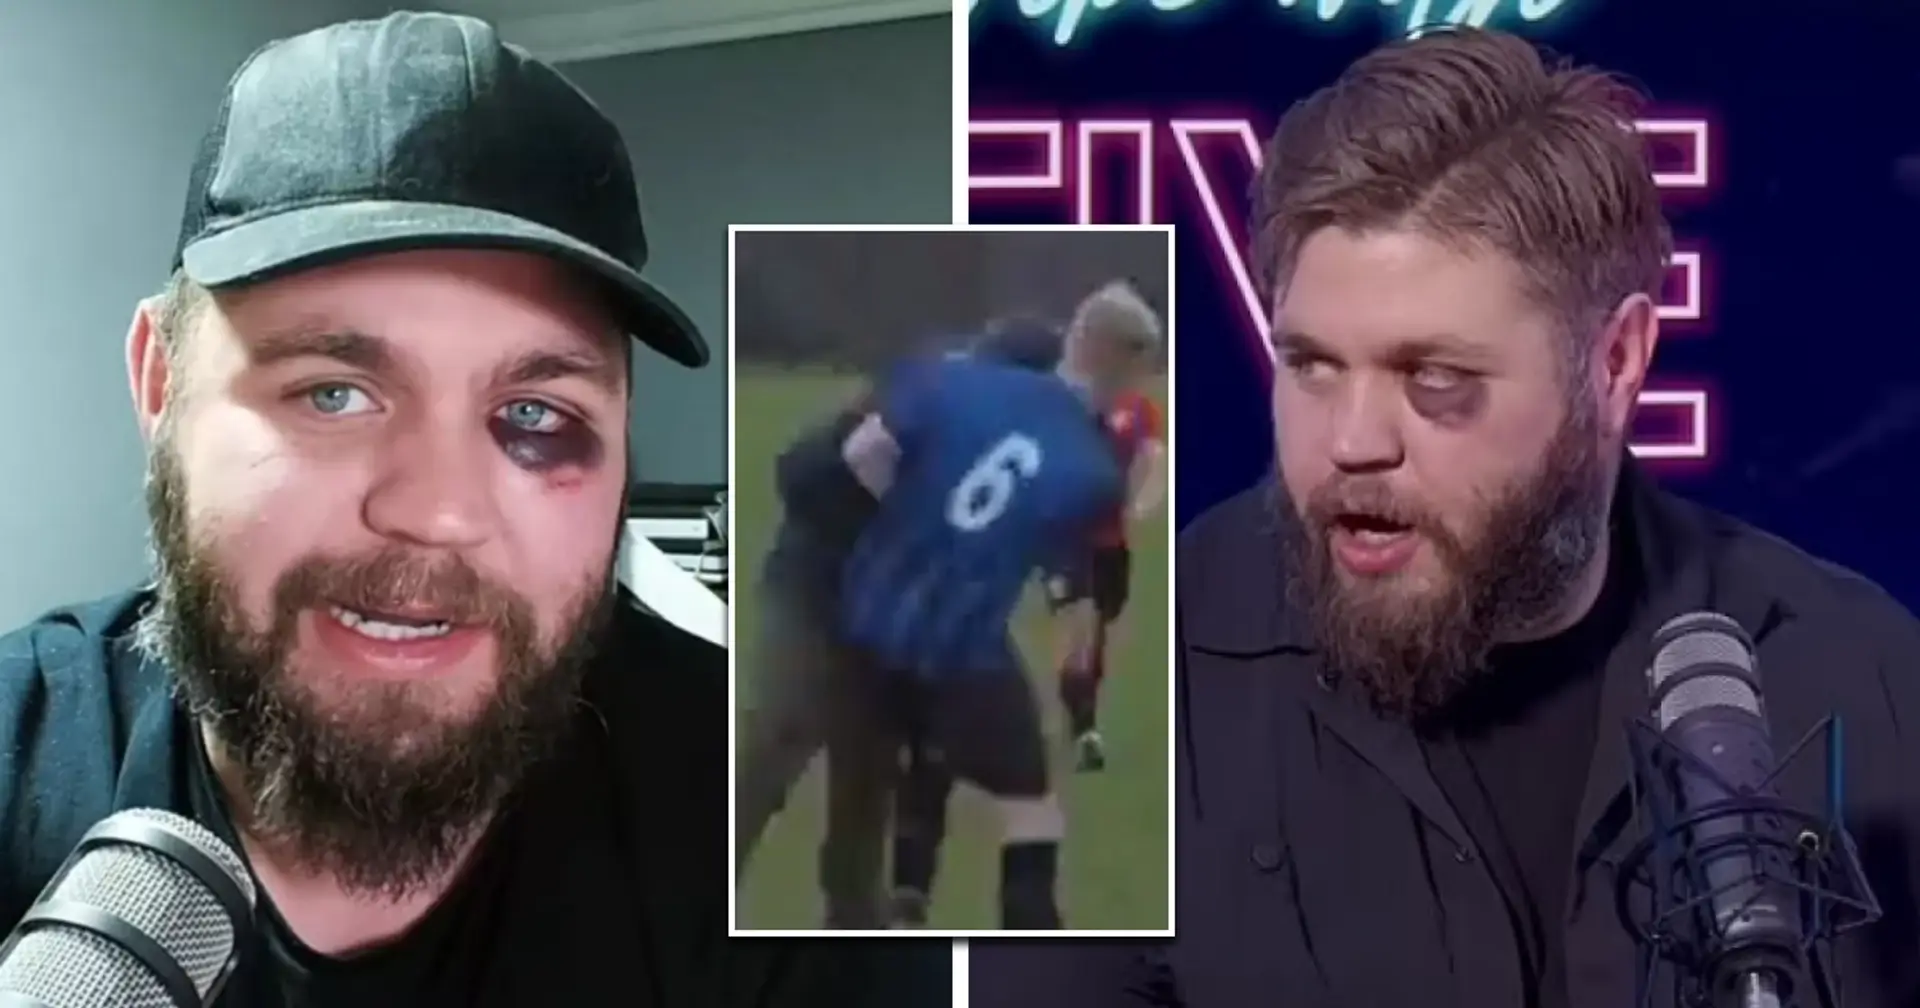 Ferdinand's YouTube host throws punches and headbutt to spark football brawl, ends up with a black eye